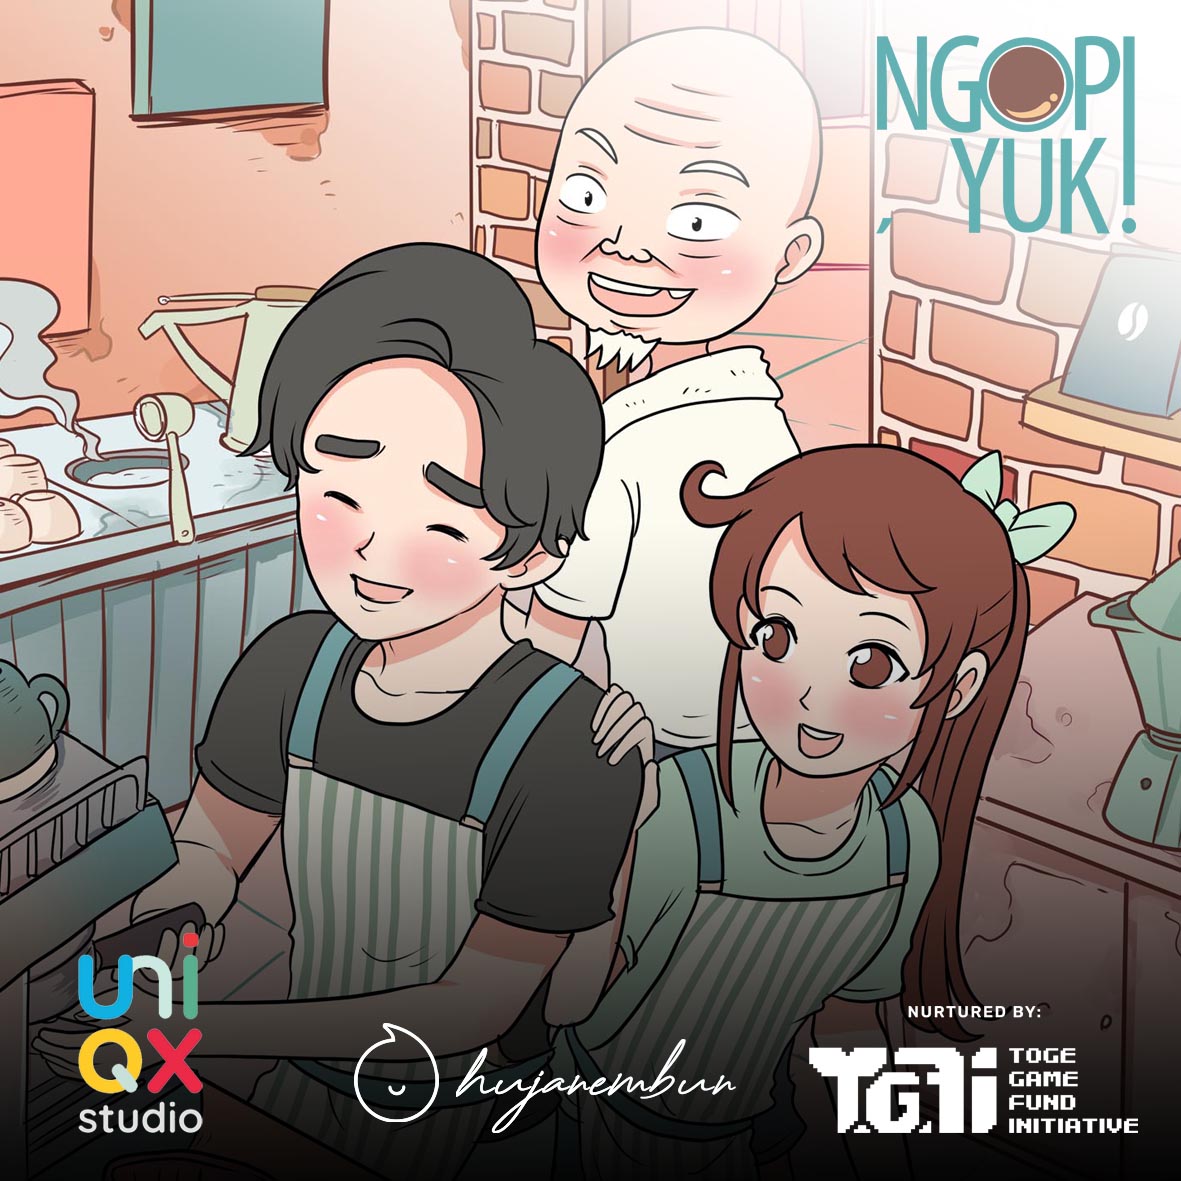 Halo guys!😊
This time we want to share a little of our experience when we followed the TGFI funding program organized by @togeproductions🌱
#storytelling #gamedev #funding #indiegames #IndieGameDev #ngopiyuk #screenshotsaturday #WEBTOON #SoutheastAsia #seagames #ScreenshotSunday